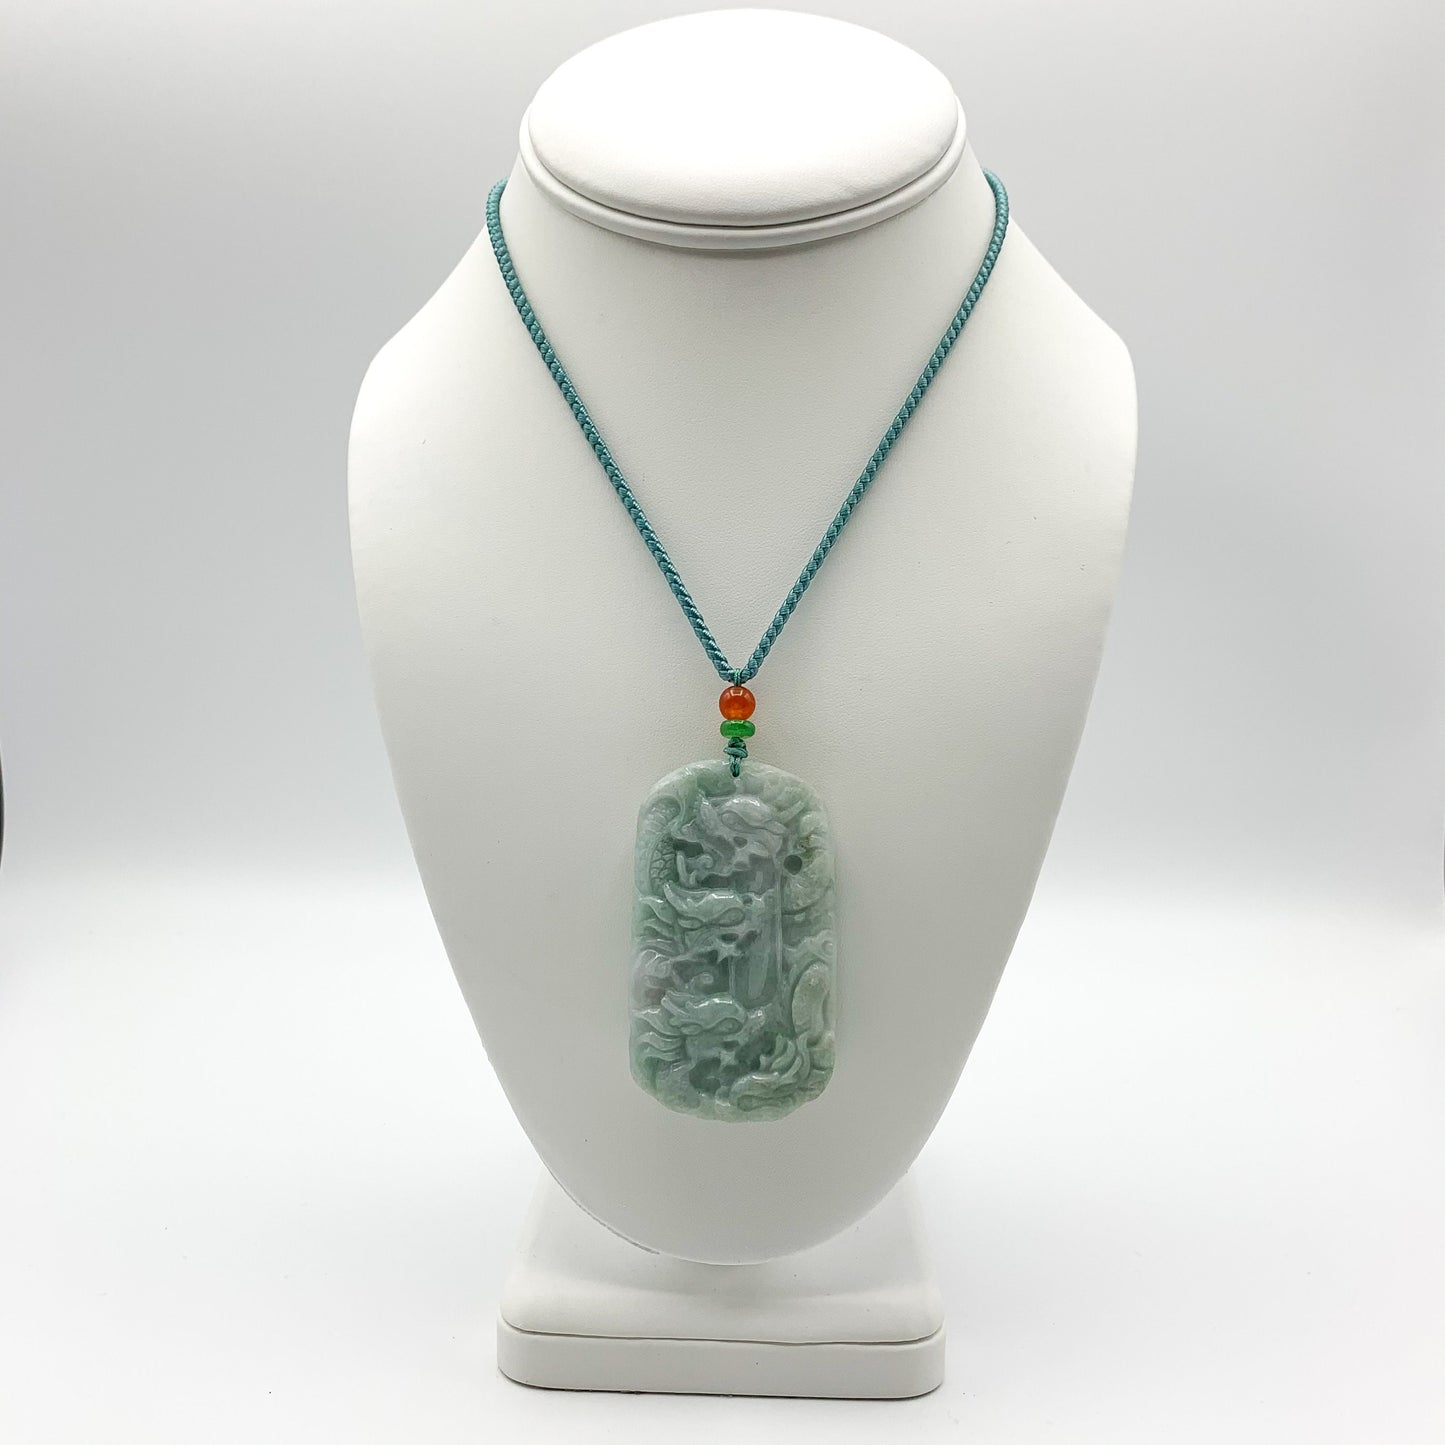 9 Dragon Jadeite Jade Chinese Zodiac Hand Carved Pendant Necklace, YJ-0321-0447197 - AriaDesignCollection